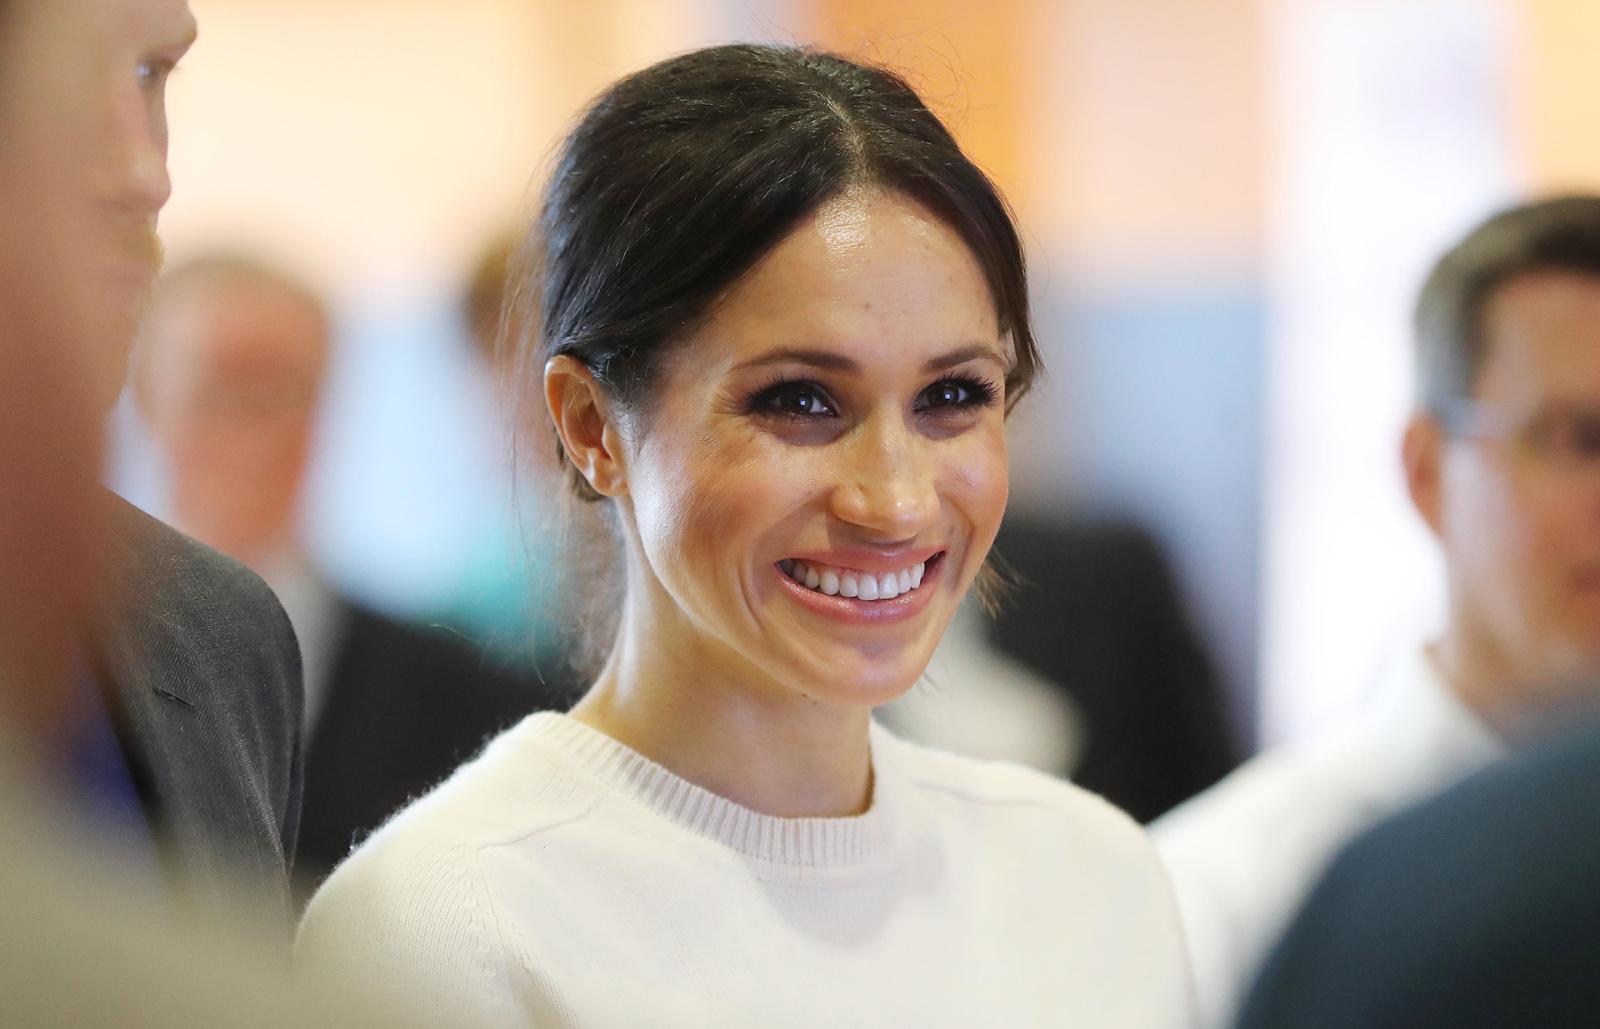 7 Fascinating Things You Didn't Know About Meghan Markle - image 2